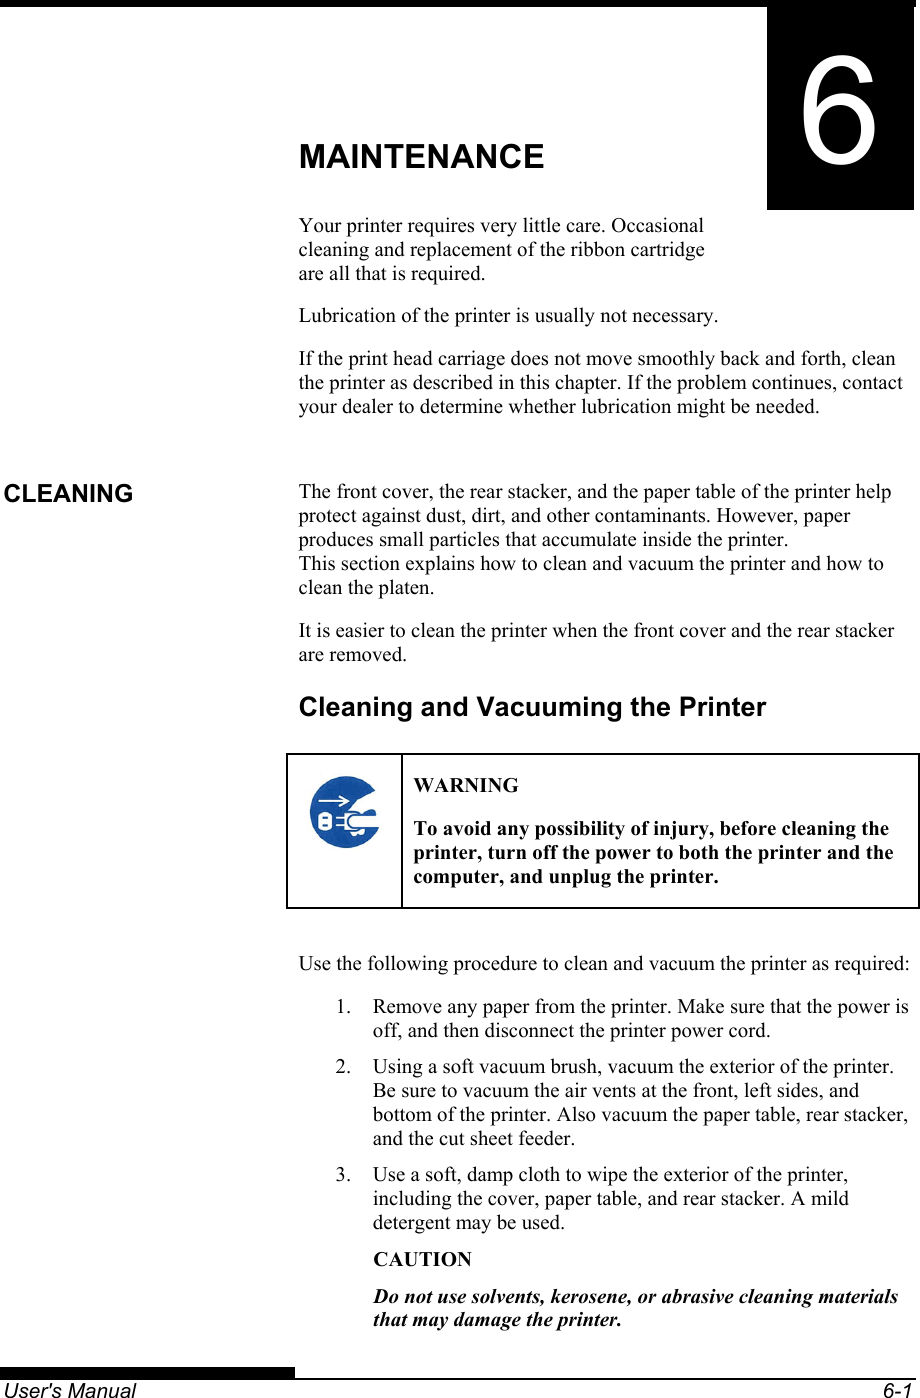   User&apos;s Manual  6-1 6 CHAPTER 6  MAINTENANCE MAINTENANCE Your printer requires very little care. Occasional cleaning and replacement of the ribbon cartridge are all that is required. Lubrication of the printer is usually not necessary. If the print head carriage does not move smoothly back and forth, clean the printer as described in this chapter. If the problem continues, contact your dealer to determine whether lubrication might be needed.  The front cover, the rear stacker, and the paper table of the printer help protect against dust, dirt, and other contaminants. However, paper produces small particles that accumulate inside the printer. This section explains how to clean and vacuum the printer and how to clean the platen. It is easier to clean the printer when the front cover and the rear stacker are removed. Cleaning and Vacuuming the Printer   WARNING To avoid any possibility of injury, before cleaning the printer, turn off the power to both the printer and the computer, and unplug the printer.  Use the following procedure to clean and vacuum the printer as required: 1.  Remove any paper from the printer. Make sure that the power is off, and then disconnect the printer power cord. 2.  Using a soft vacuum brush, vacuum the exterior of the printer. Be sure to vacuum the air vents at the front, left sides, and bottom of the printer. Also vacuum the paper table, rear stacker, and the cut sheet feeder. 3.  Use a soft, damp cloth to wipe the exterior of the printer, including the cover, paper table, and rear stacker. A mild detergent may be used. CAUTION Do not use solvents, kerosene, or abrasive cleaning materials that may damage the printer. CLEANING 